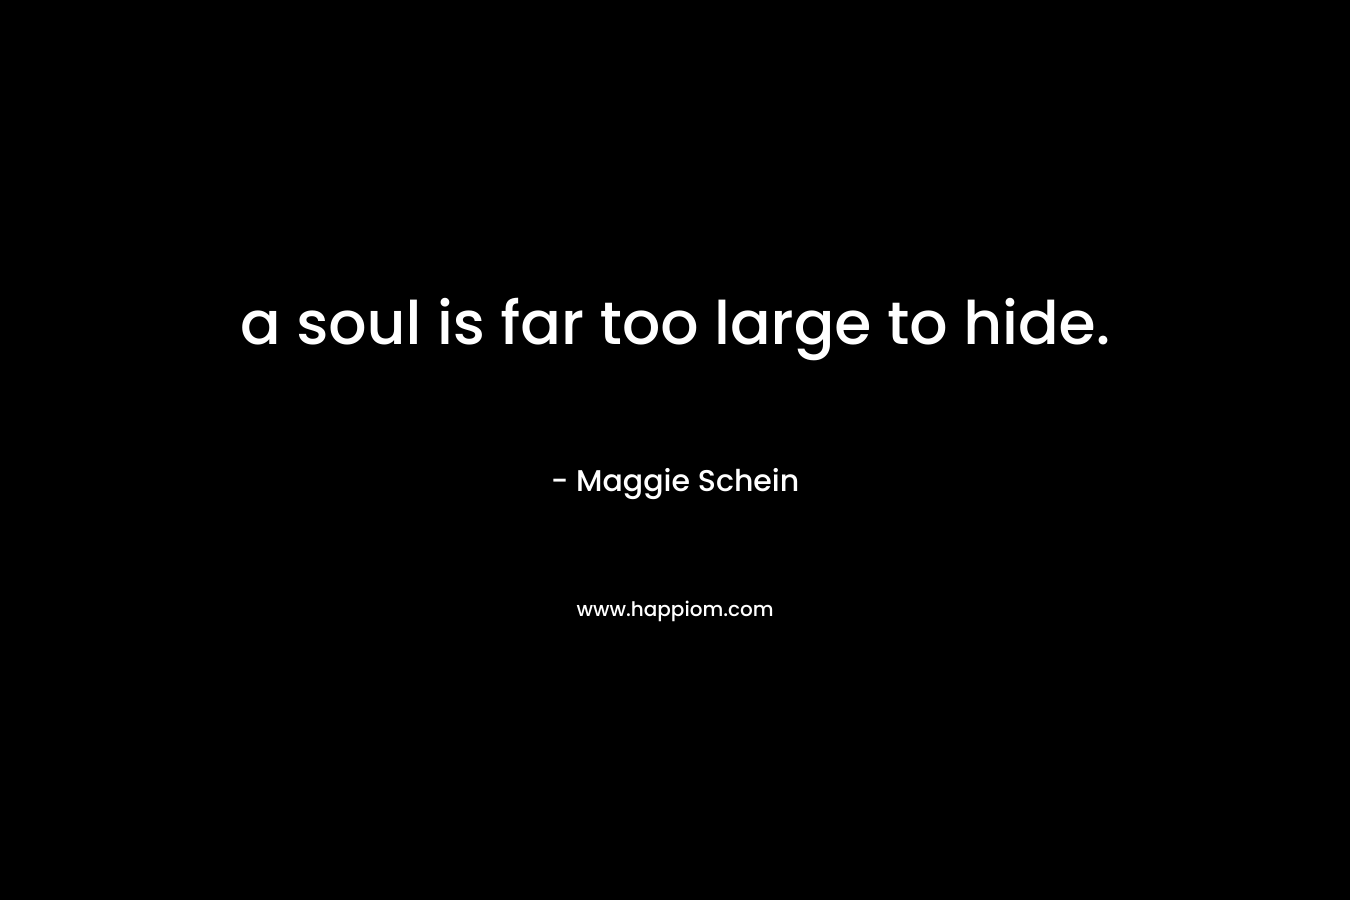 a soul is far too large to hide.